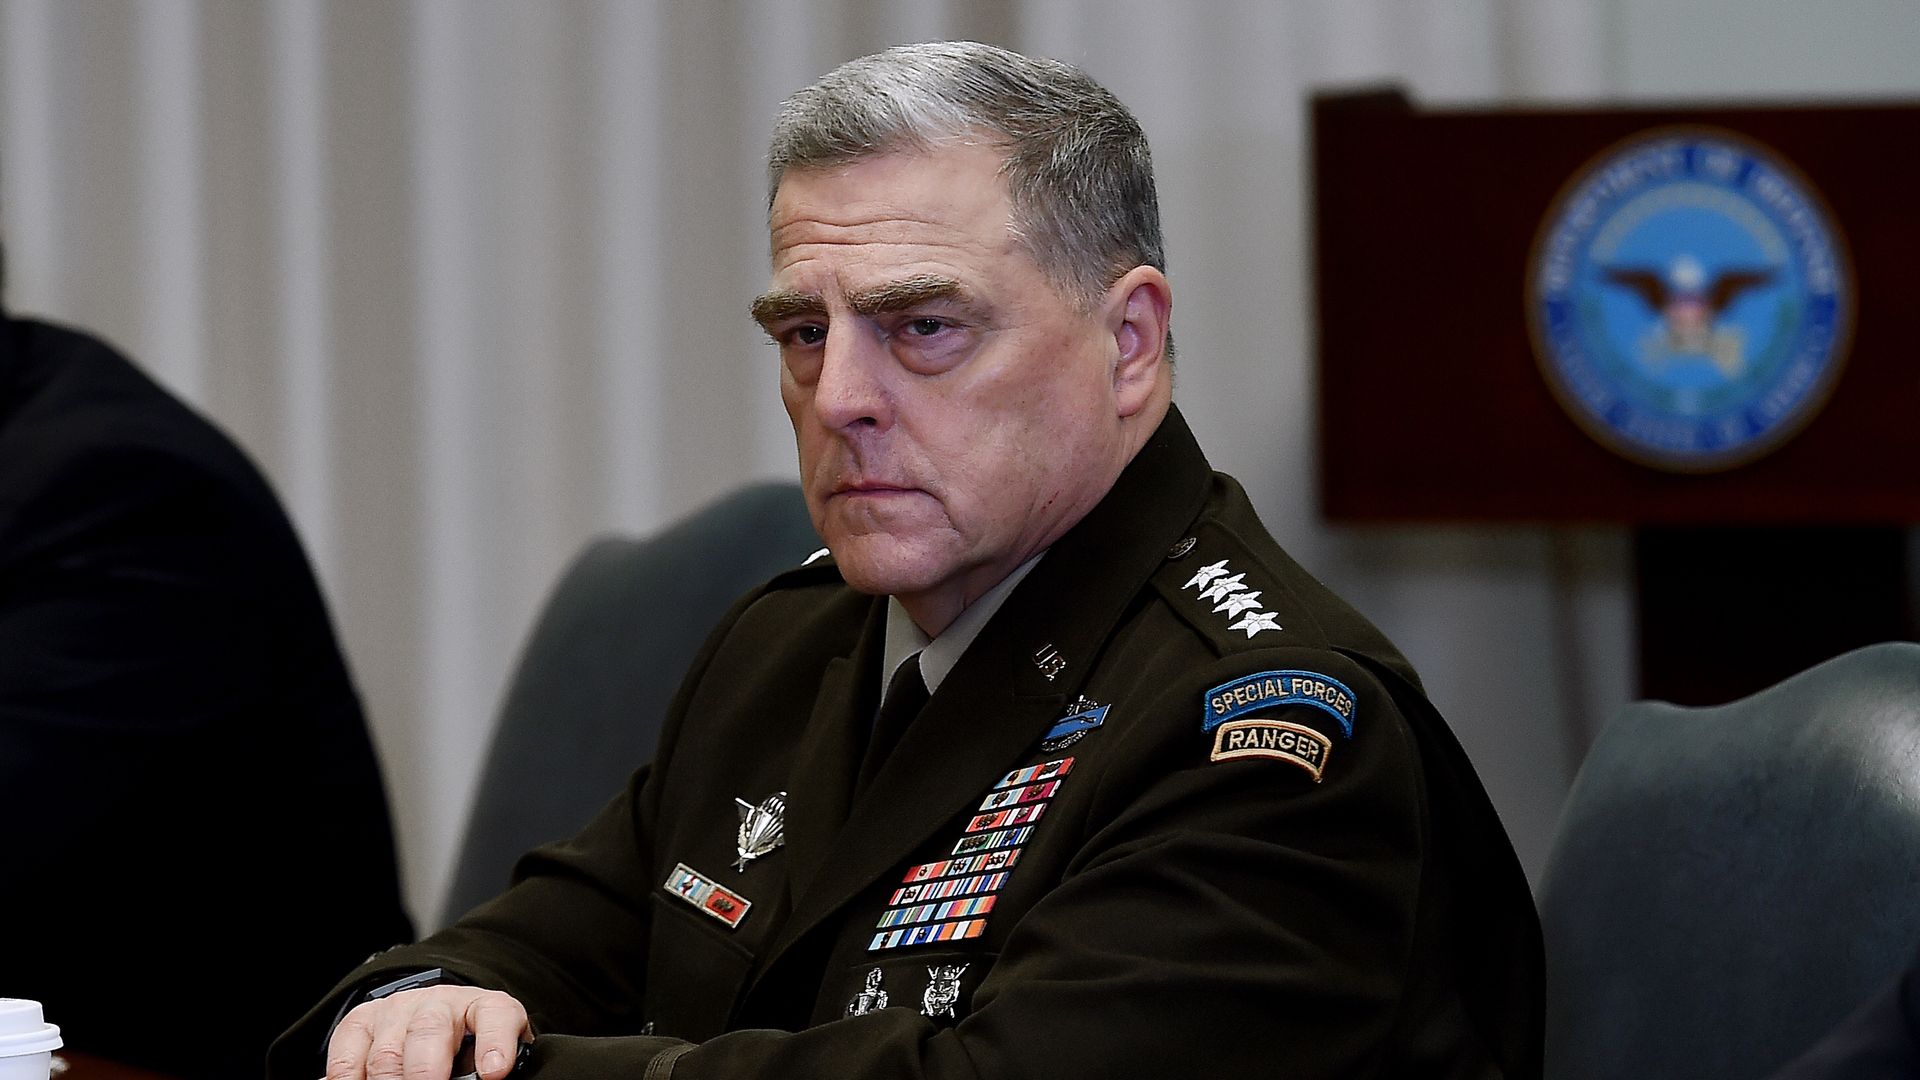 Chairman of the Joint Chiefs of Staff Mark Milley sits and listens during a Pentagon briefing